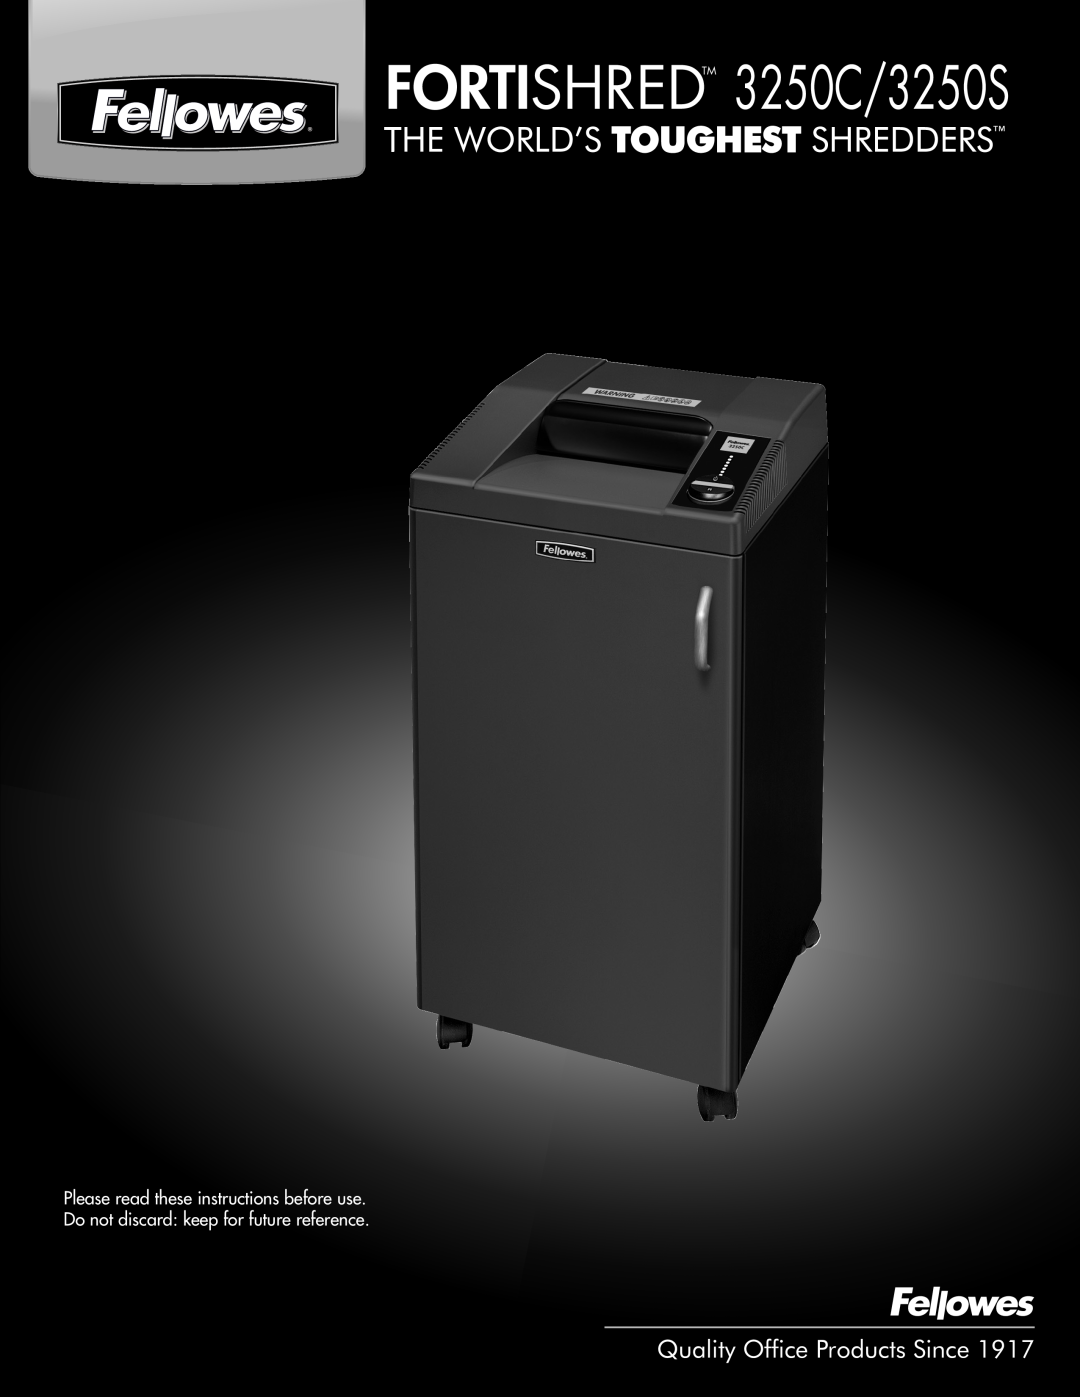 Fellowes manual FORTISHREDTM 3250C/3250S, Quality Office Products Since 